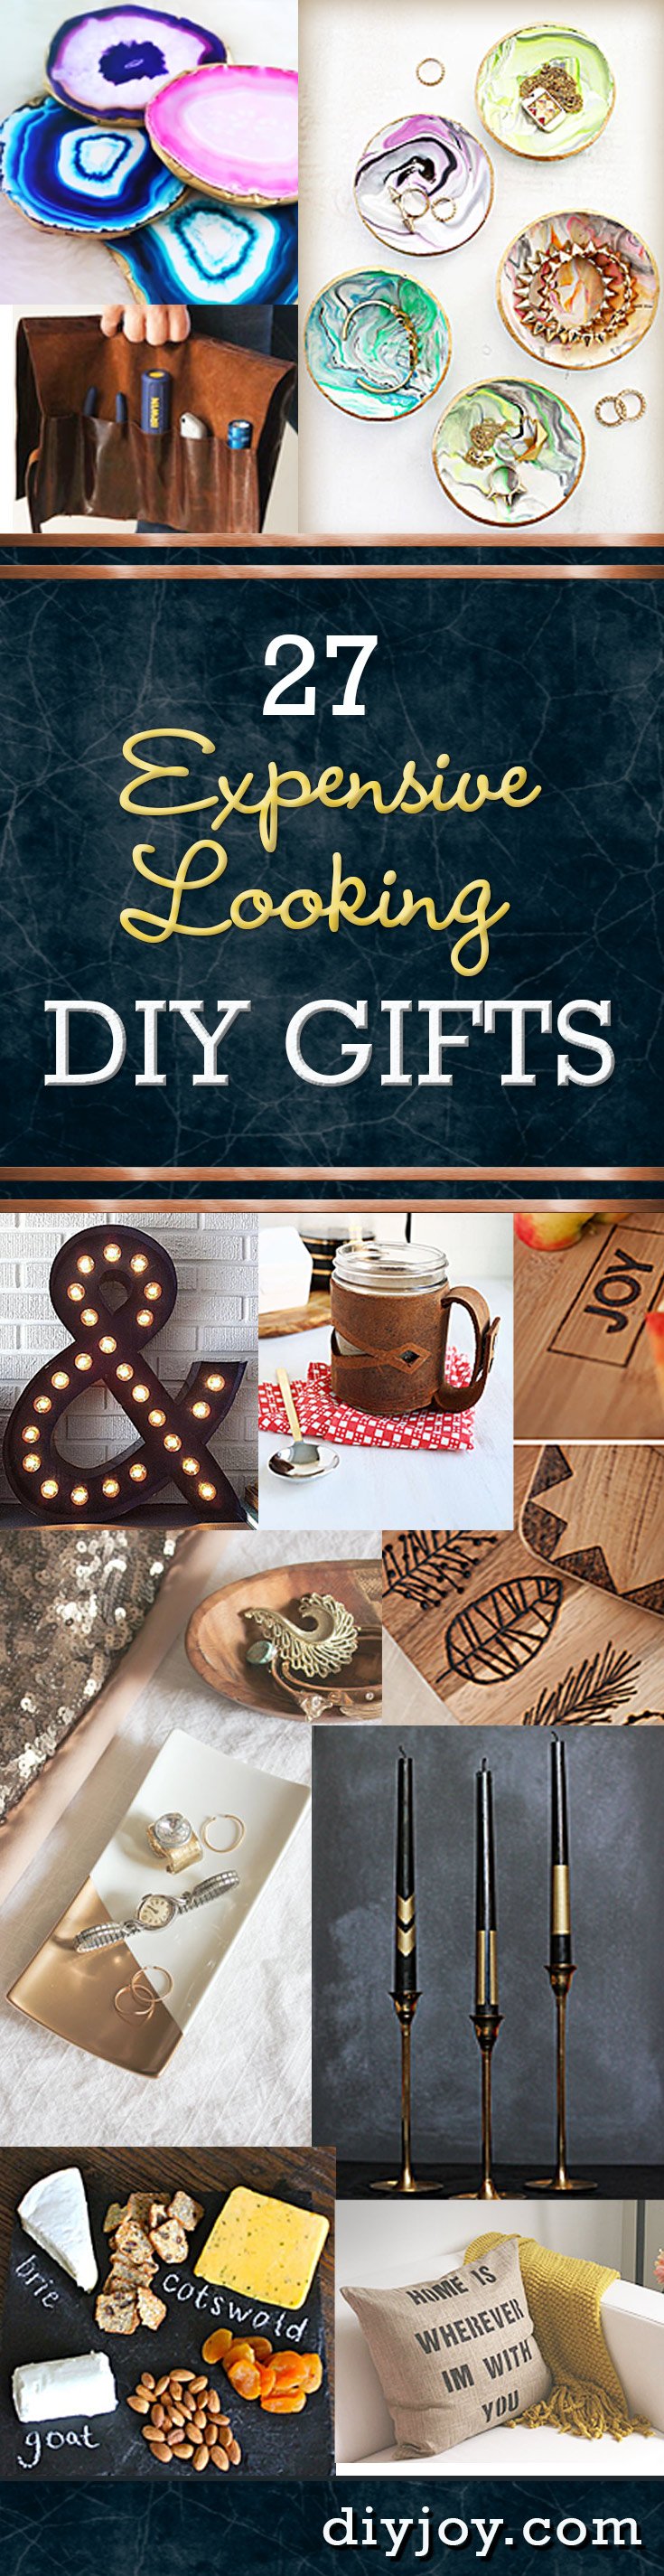 expensive diy gifts